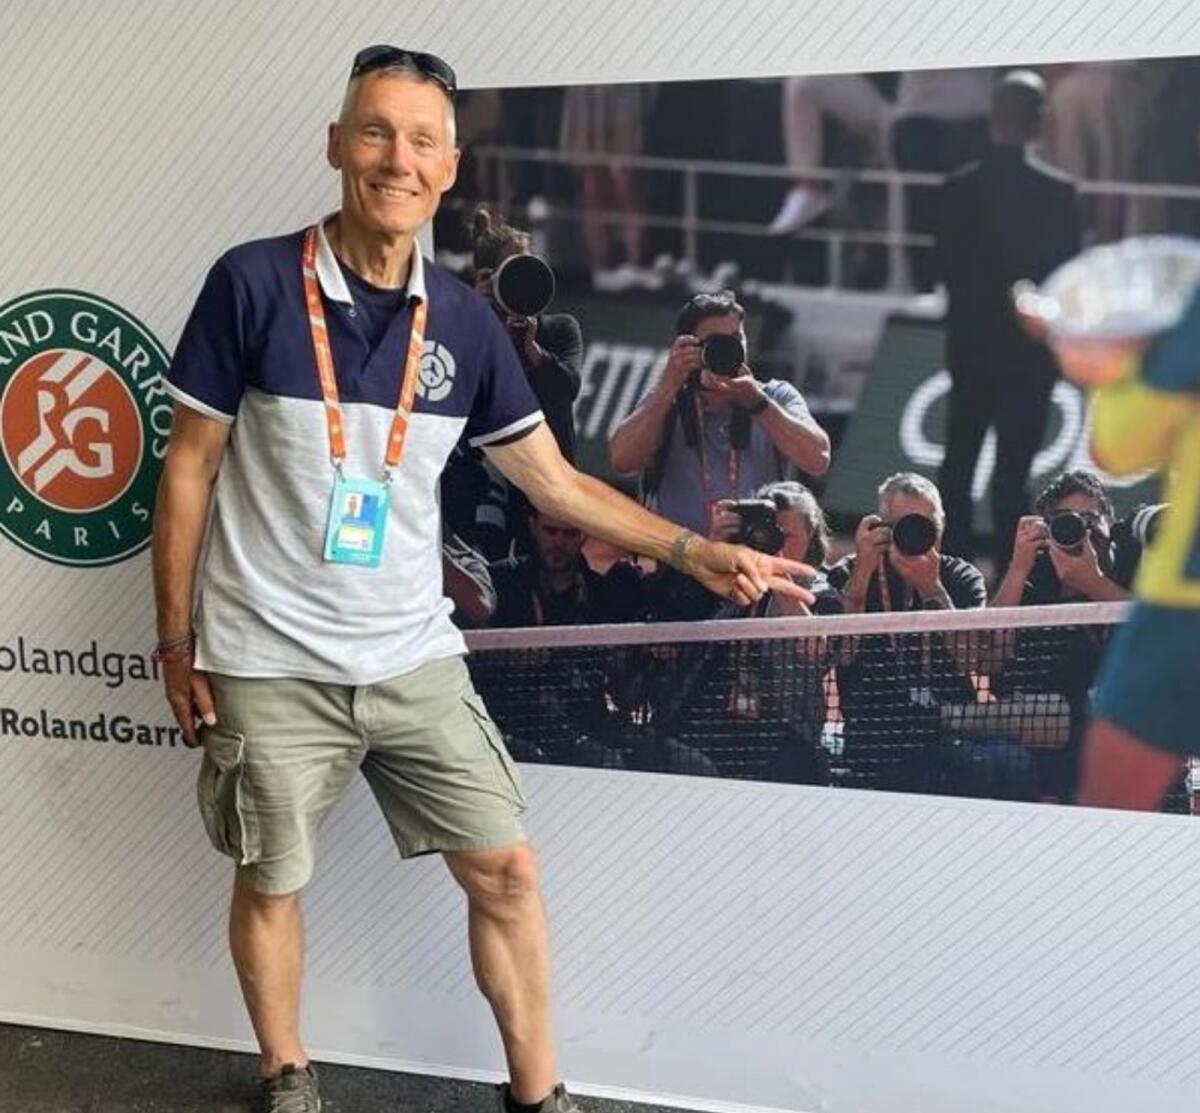 Hasenkopf is posing in front of a photograph at the French Open. In the picture, he is in the front row alongside other photographers, taking photos of the prize ceremony after the final